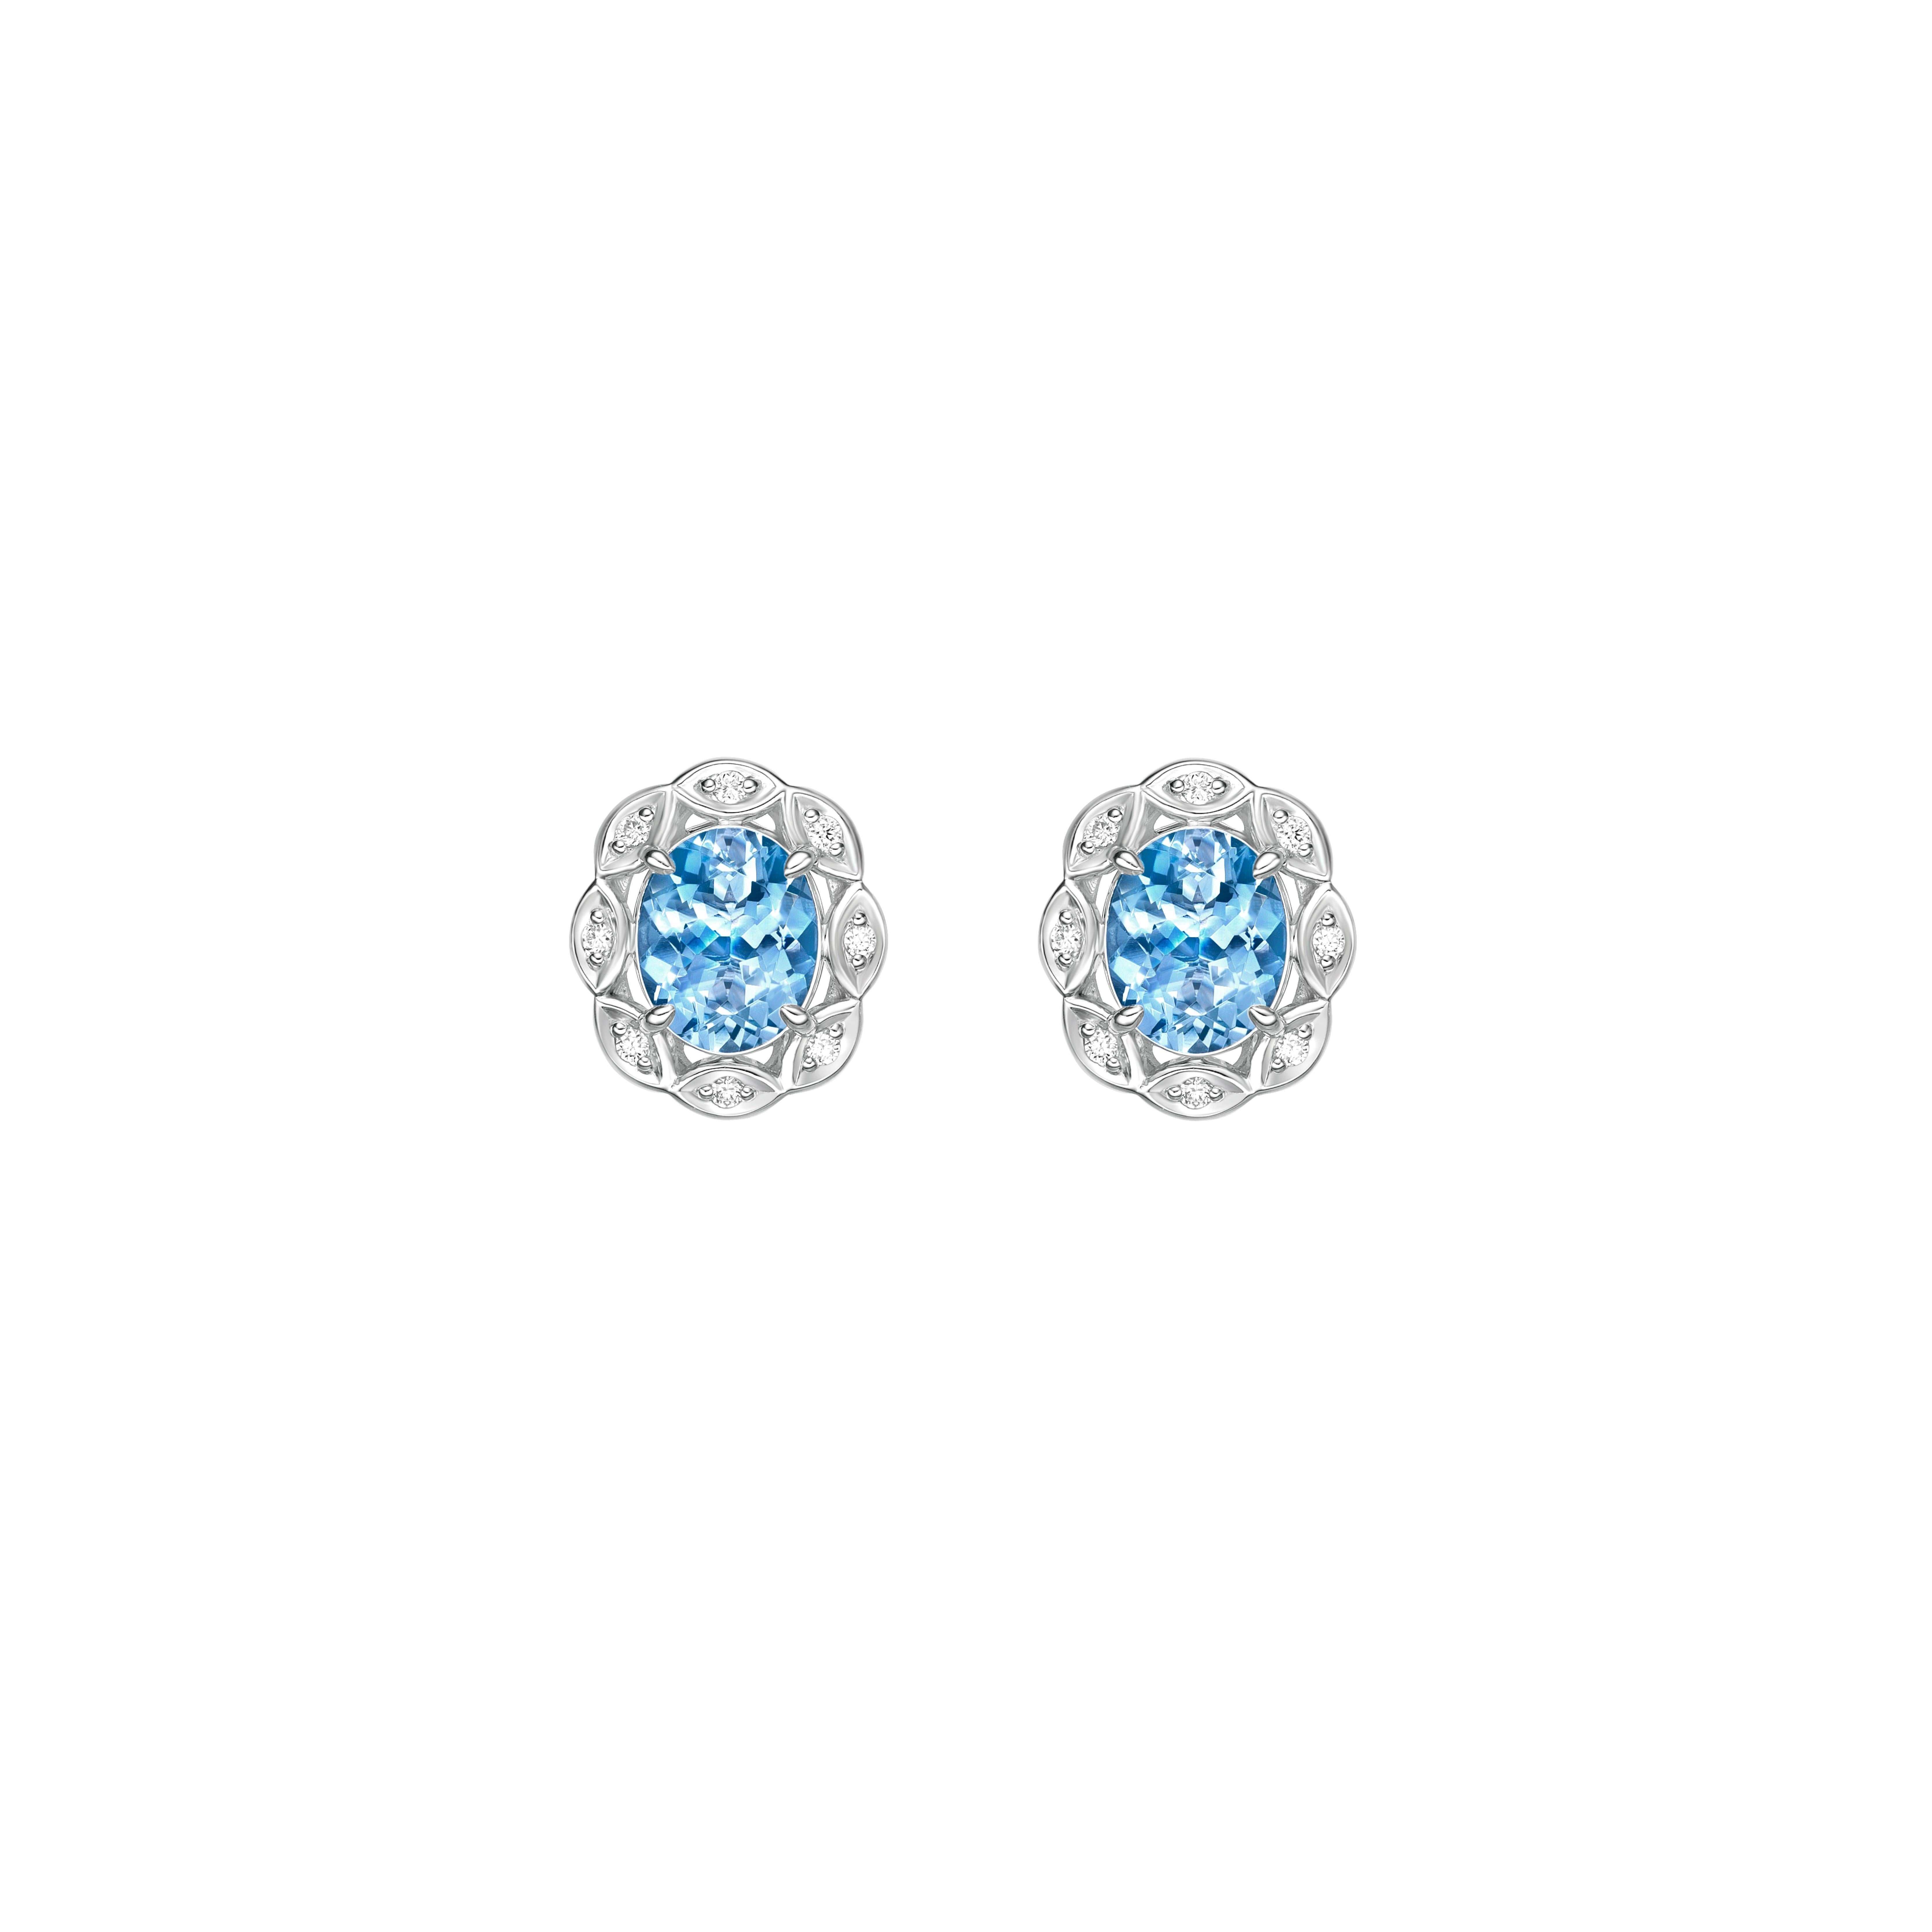 Contemporary 4.618 Carat Aquamarine Stud Earrings in 18Karat White Gold with White Diamond. For Sale